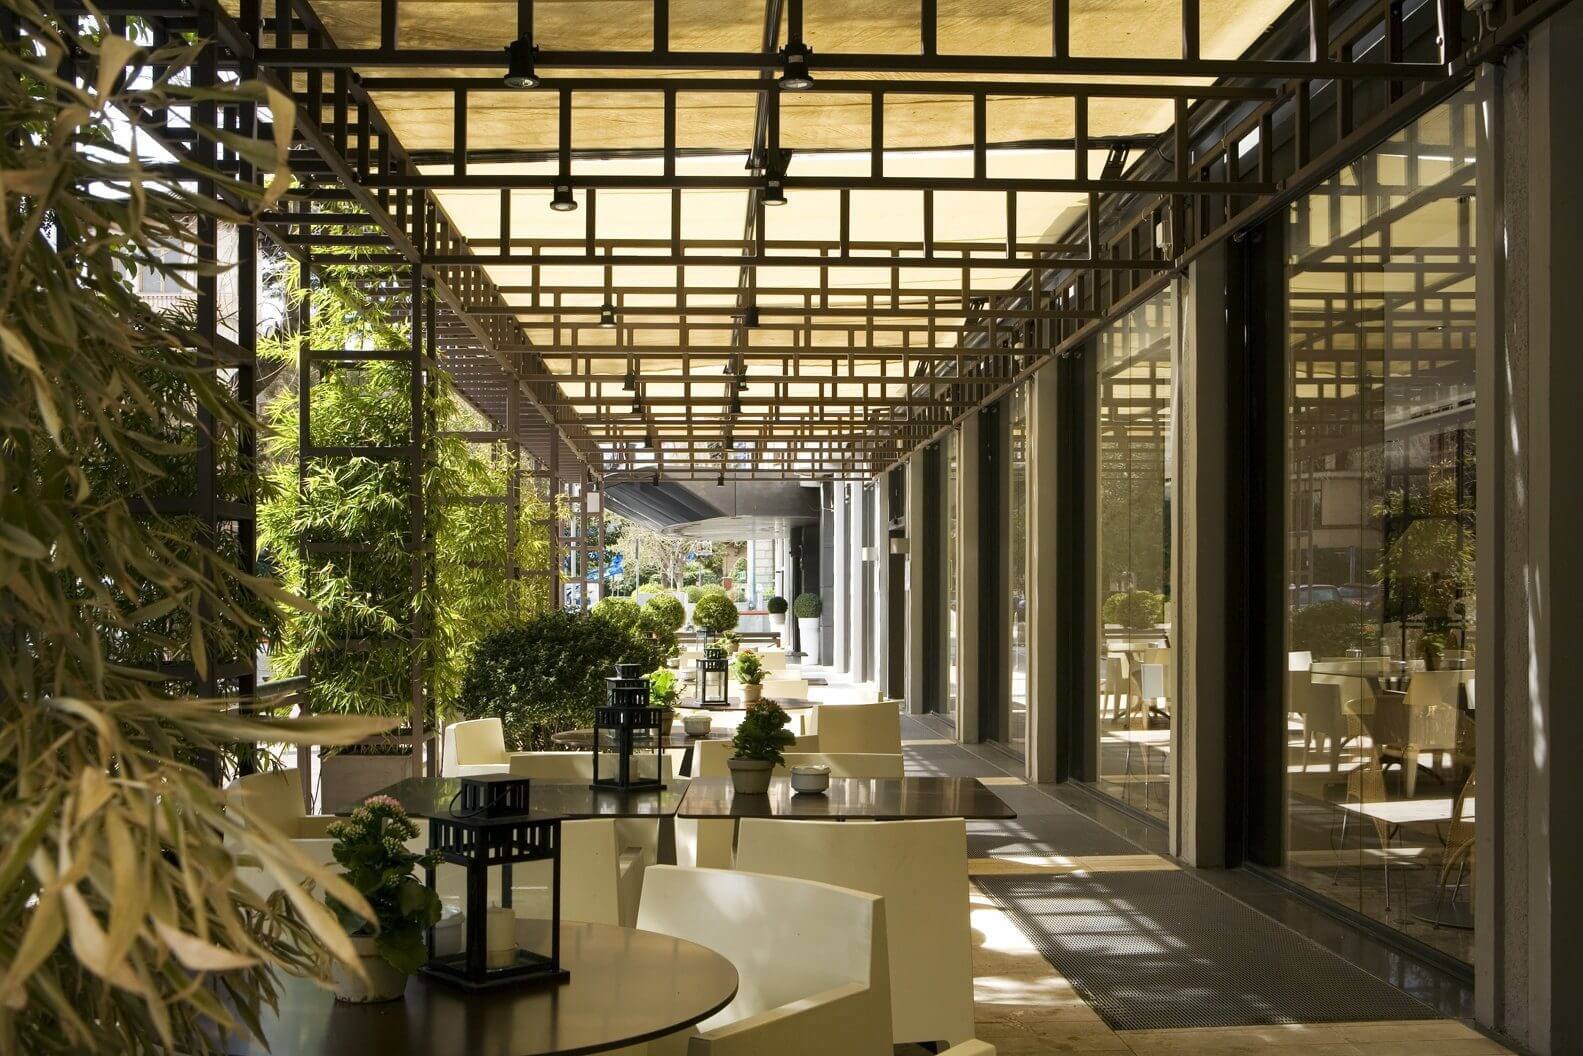 Image of the hotel's outdoor seating area, under coverr